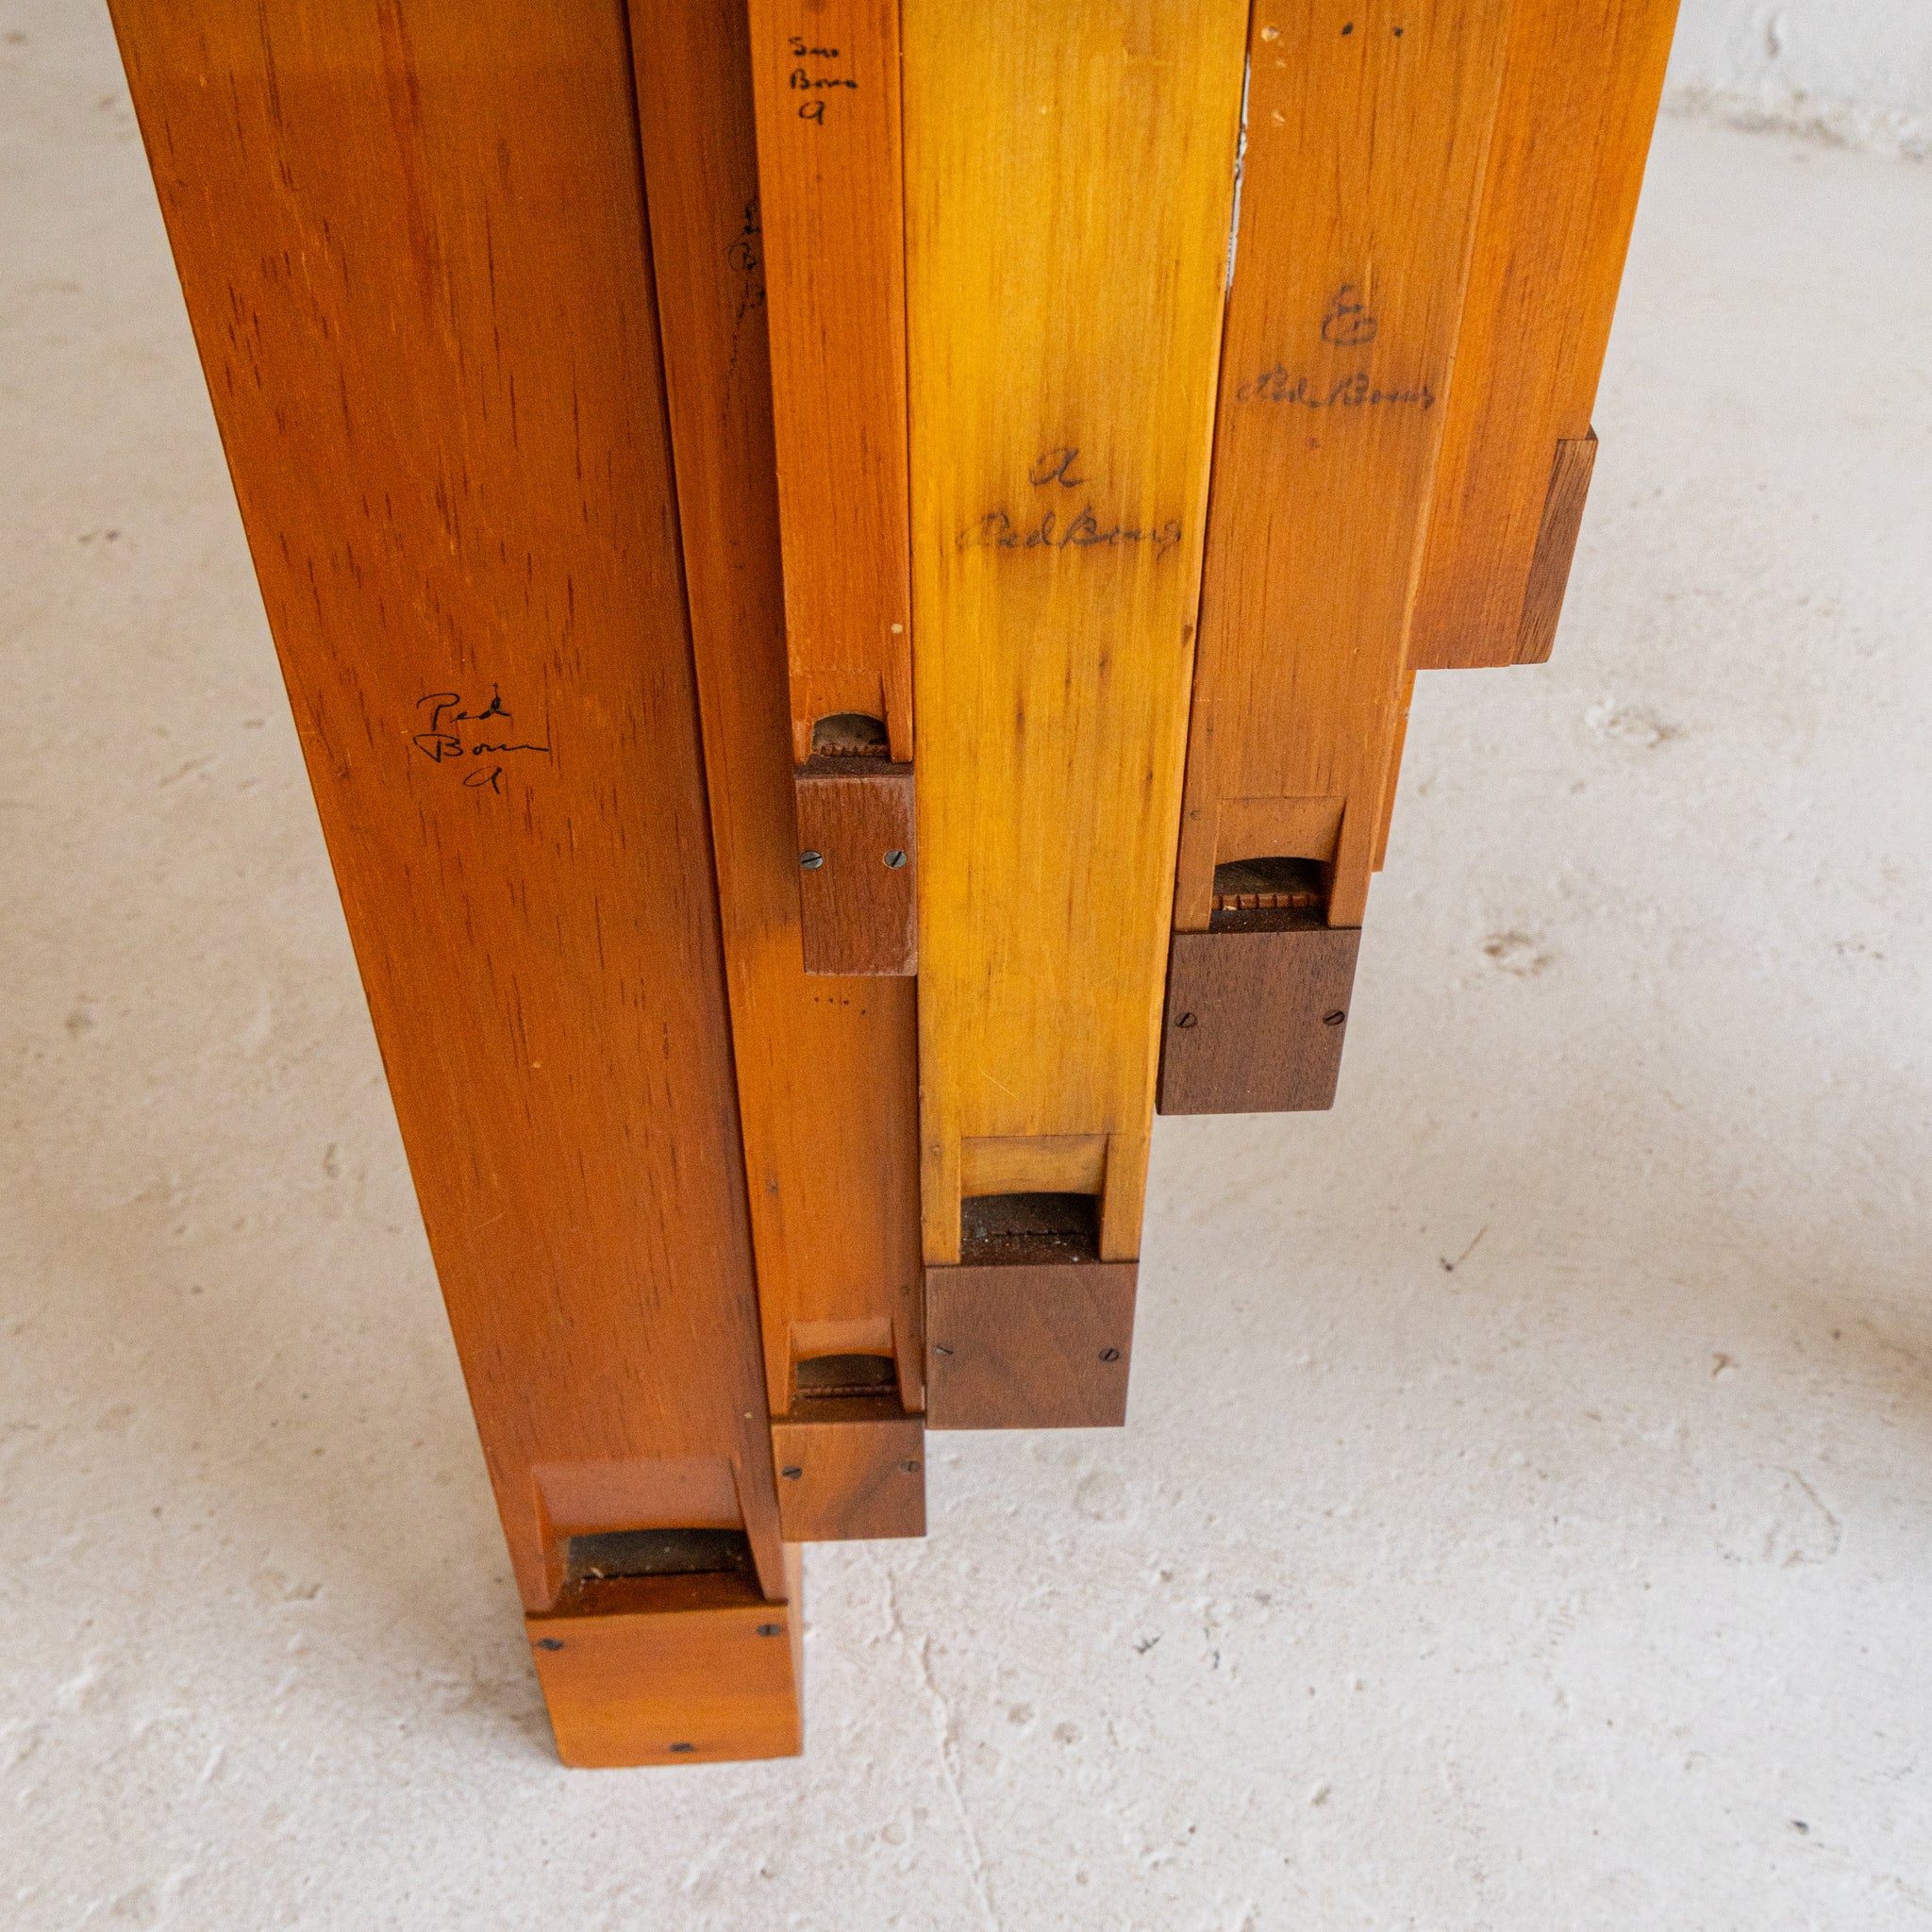 pipe organ entry table 8 close up detail reclaimed wood